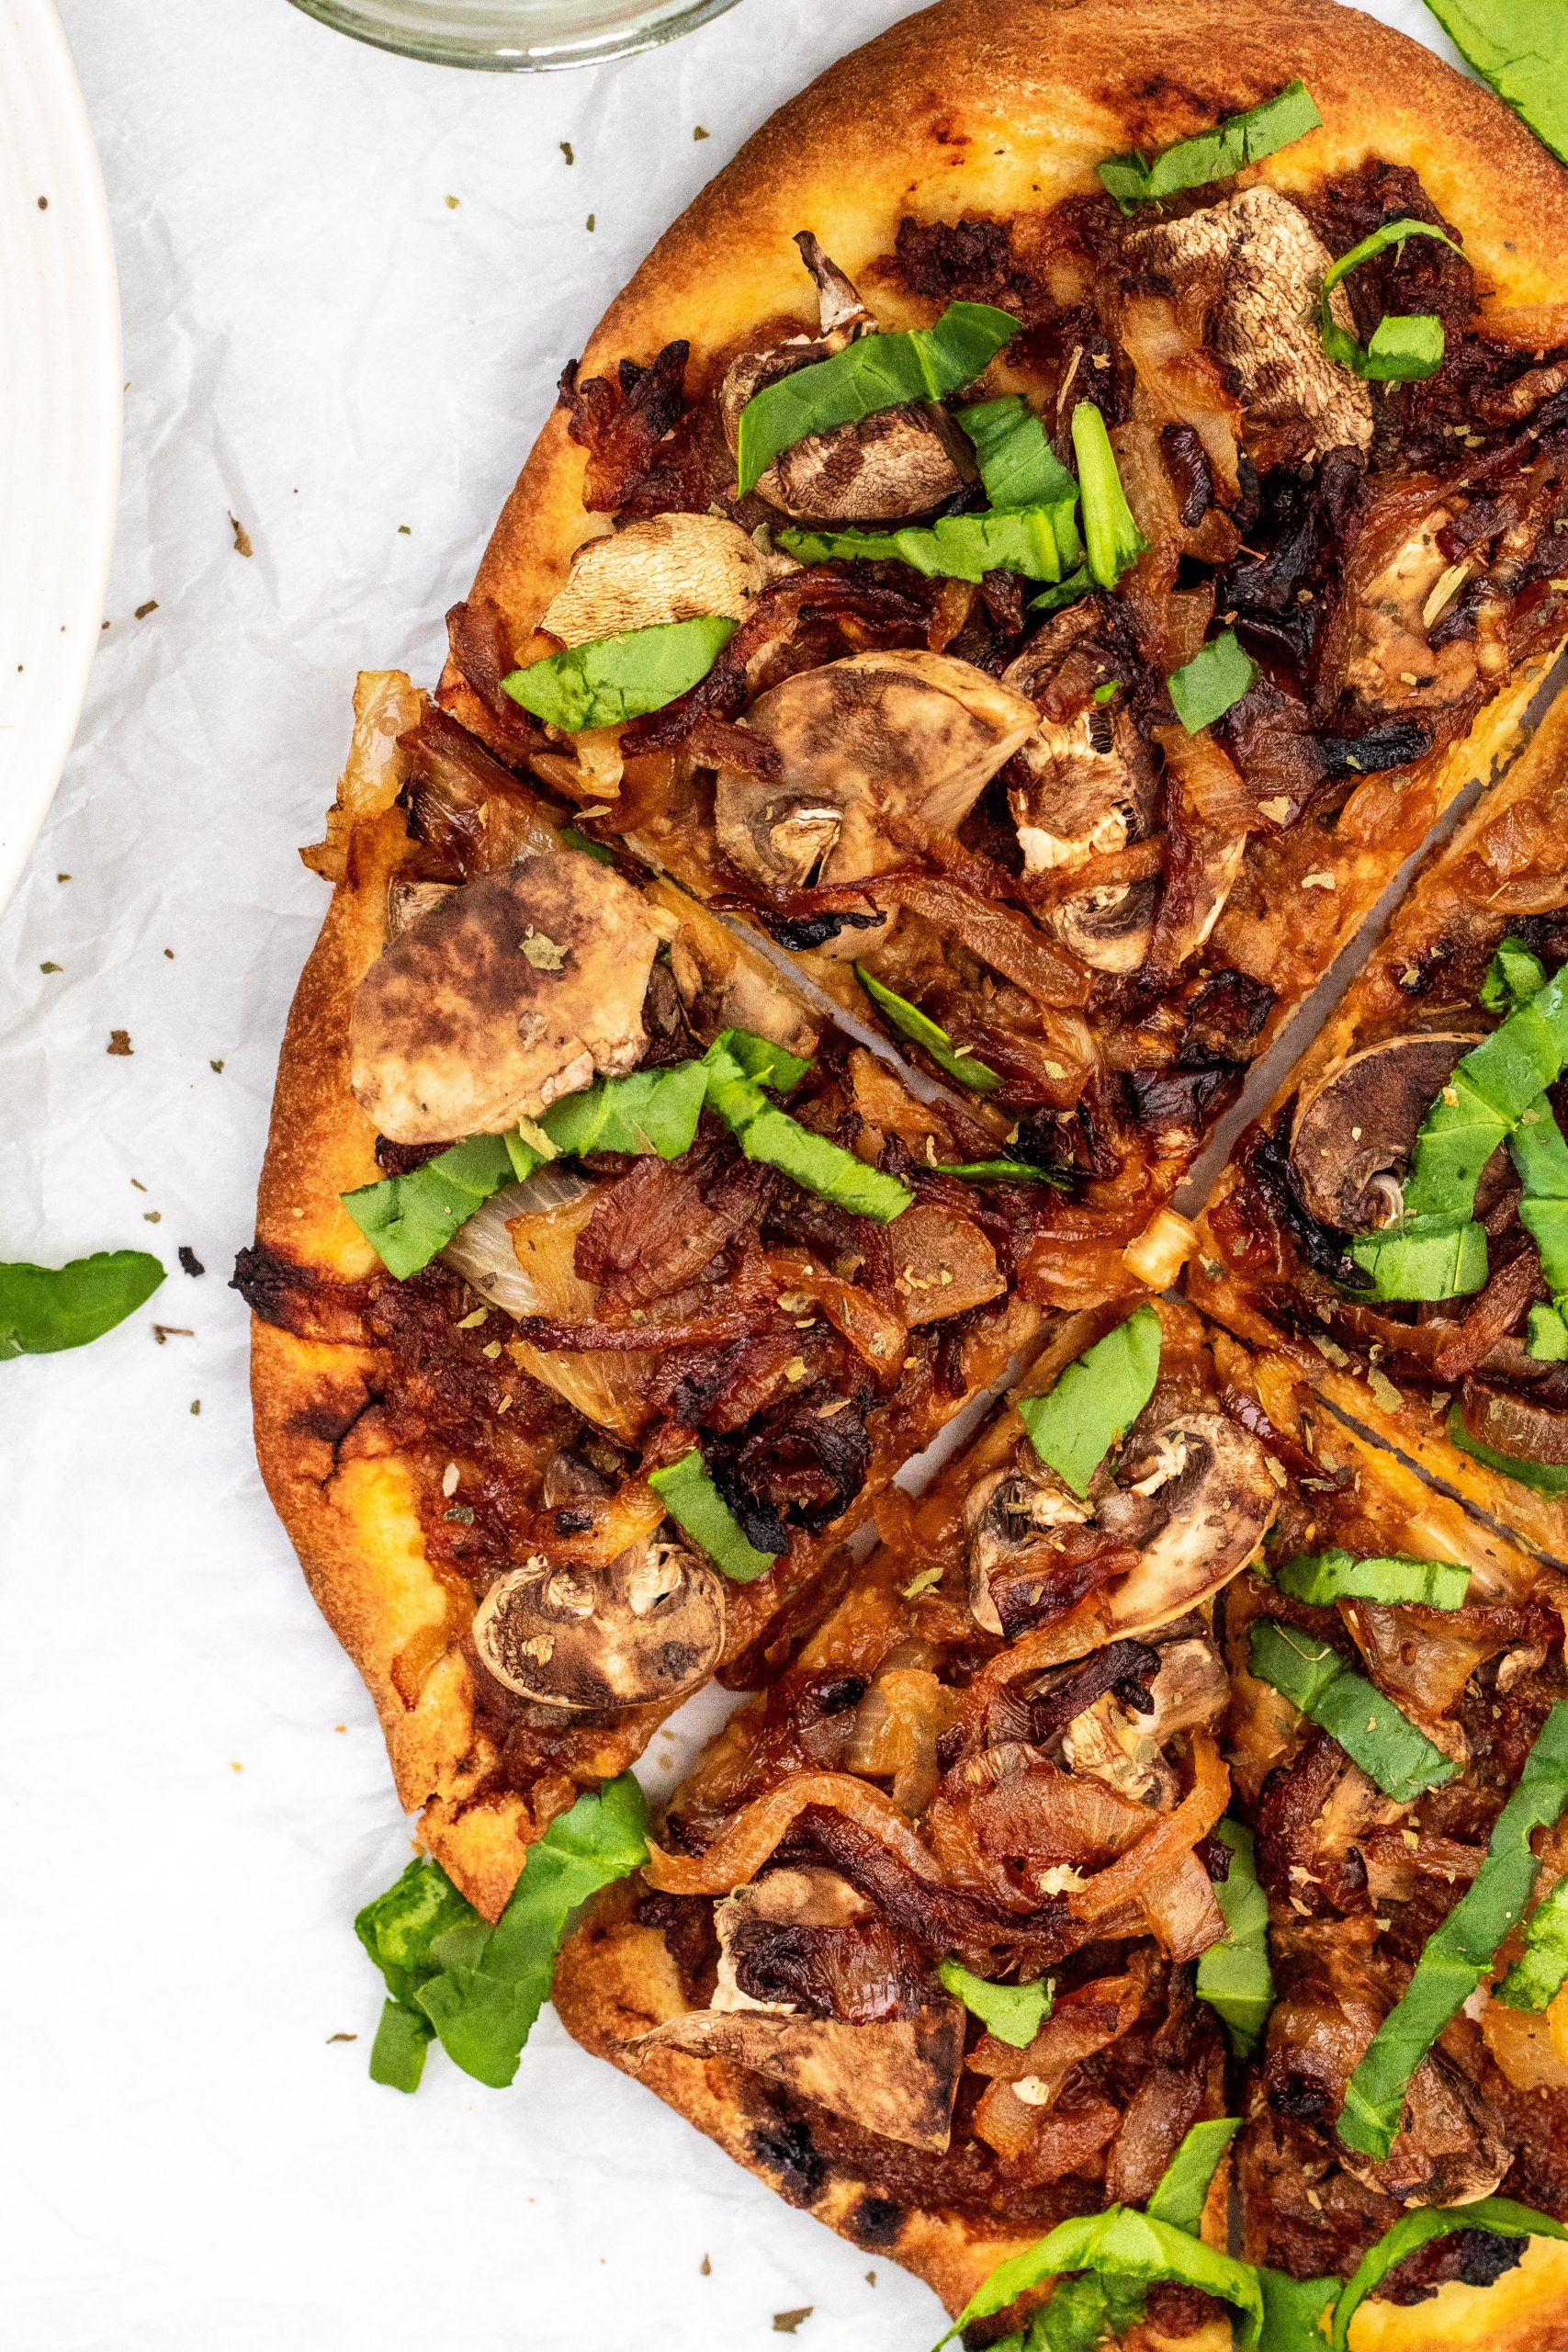 caramelized onion and mushroom naan bread pizza